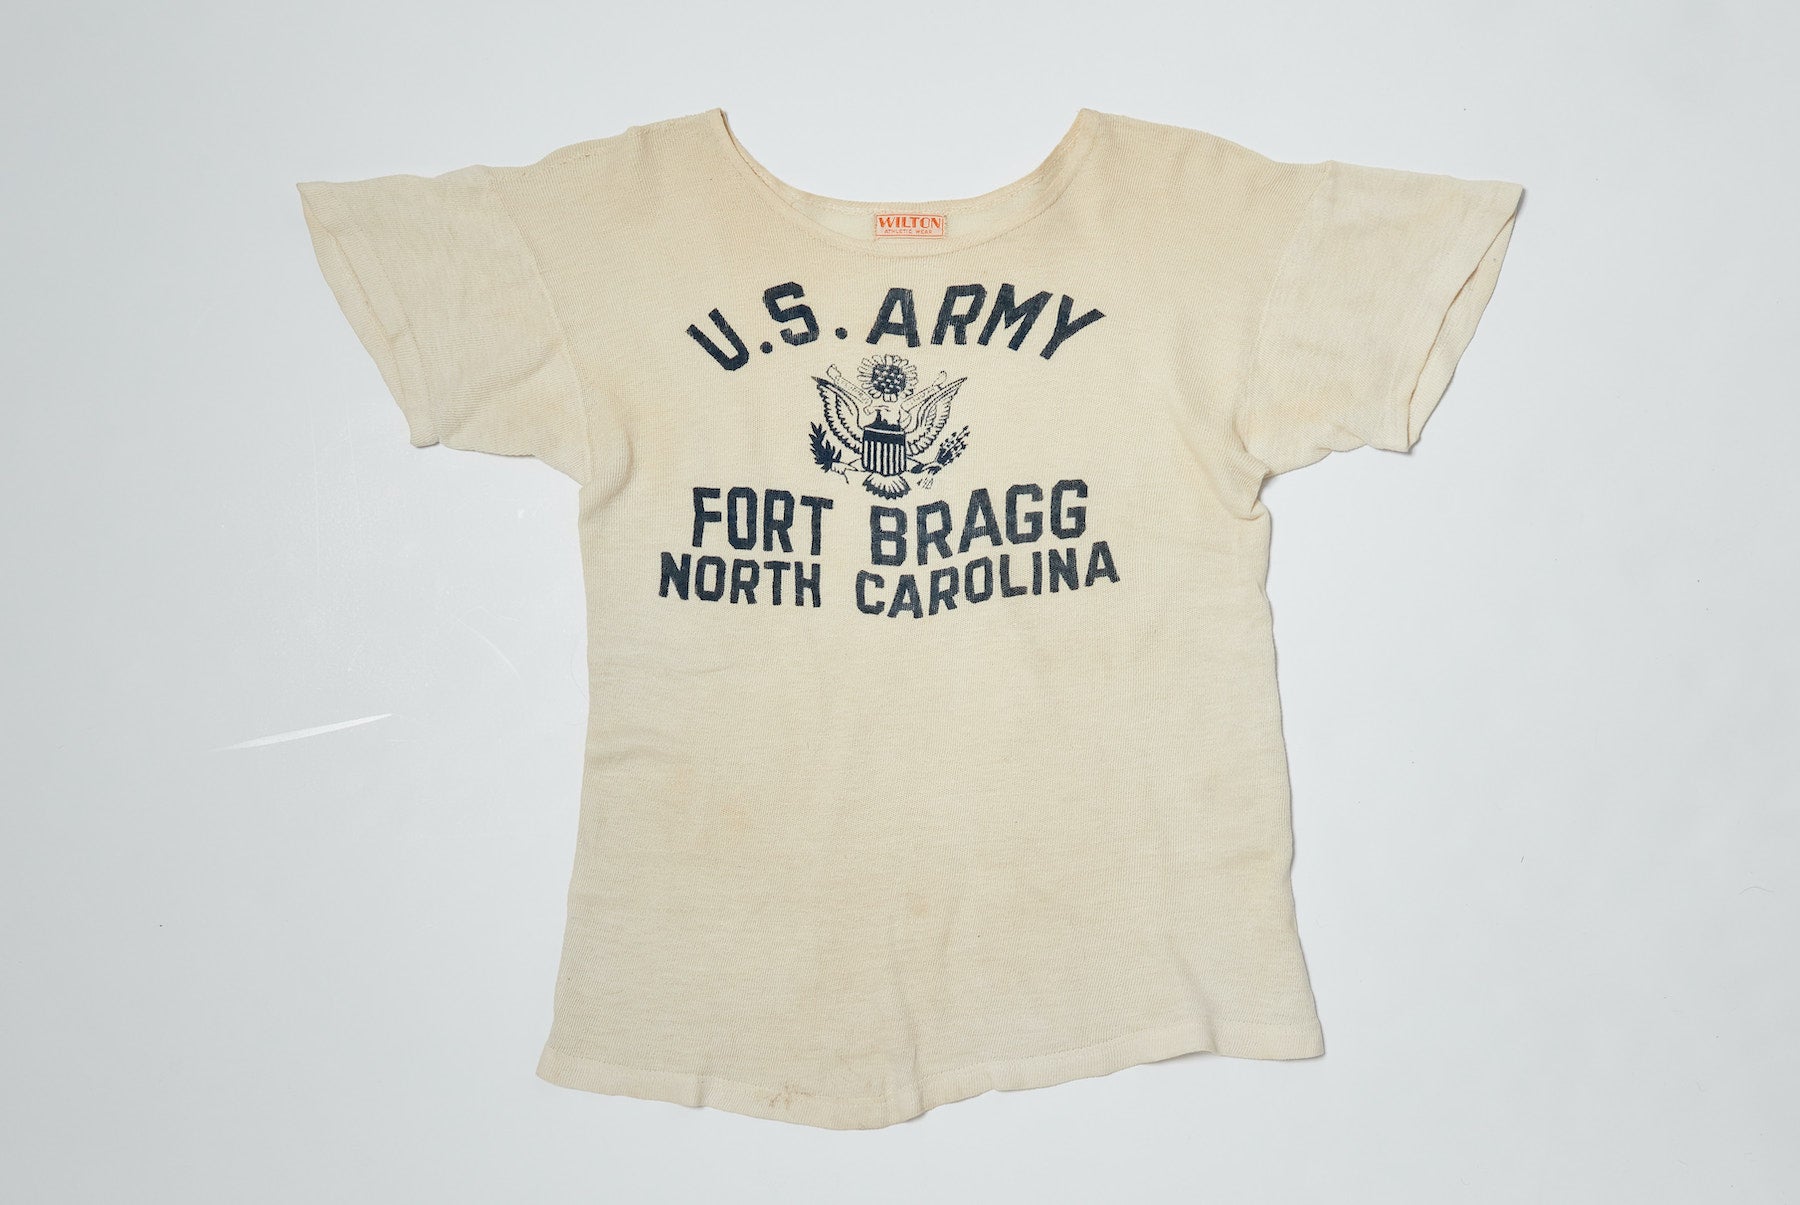 A vintage white t-shirt with U.S. Army Fort Bragg North Carolina logo printed on the front